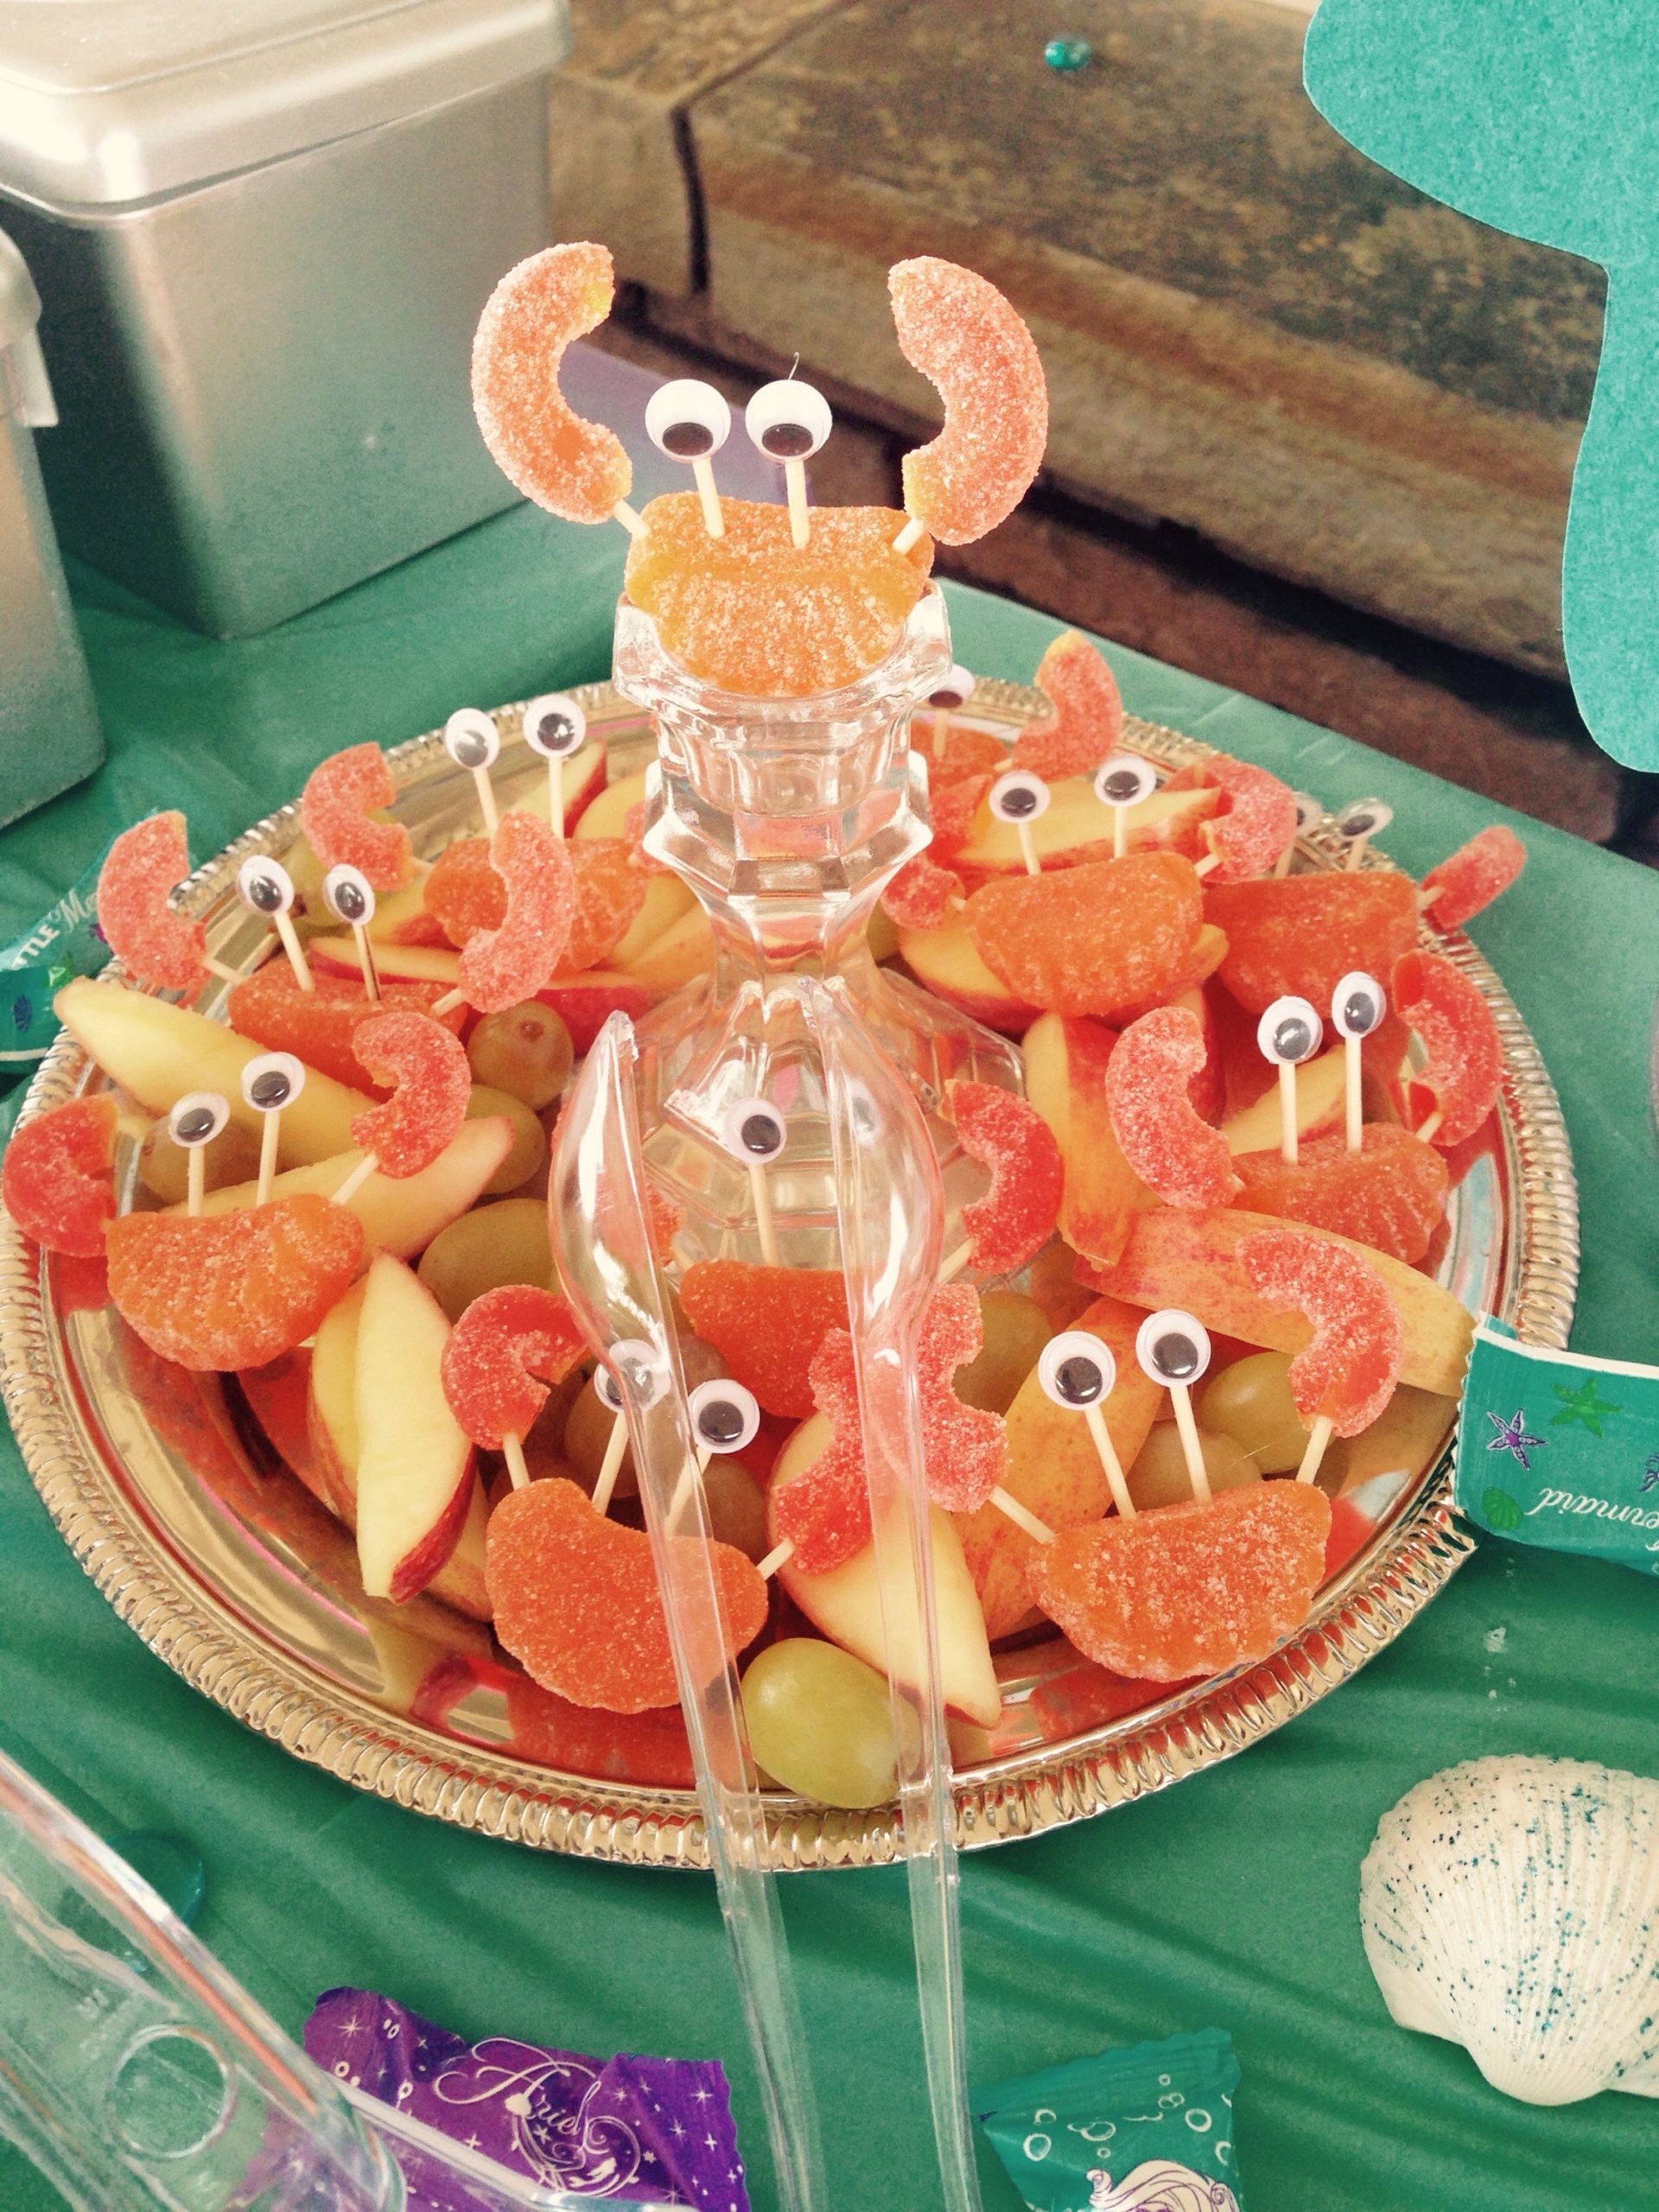 Mermaid Party Snack Ideas
 The Little Mermaid themed Birthday Party